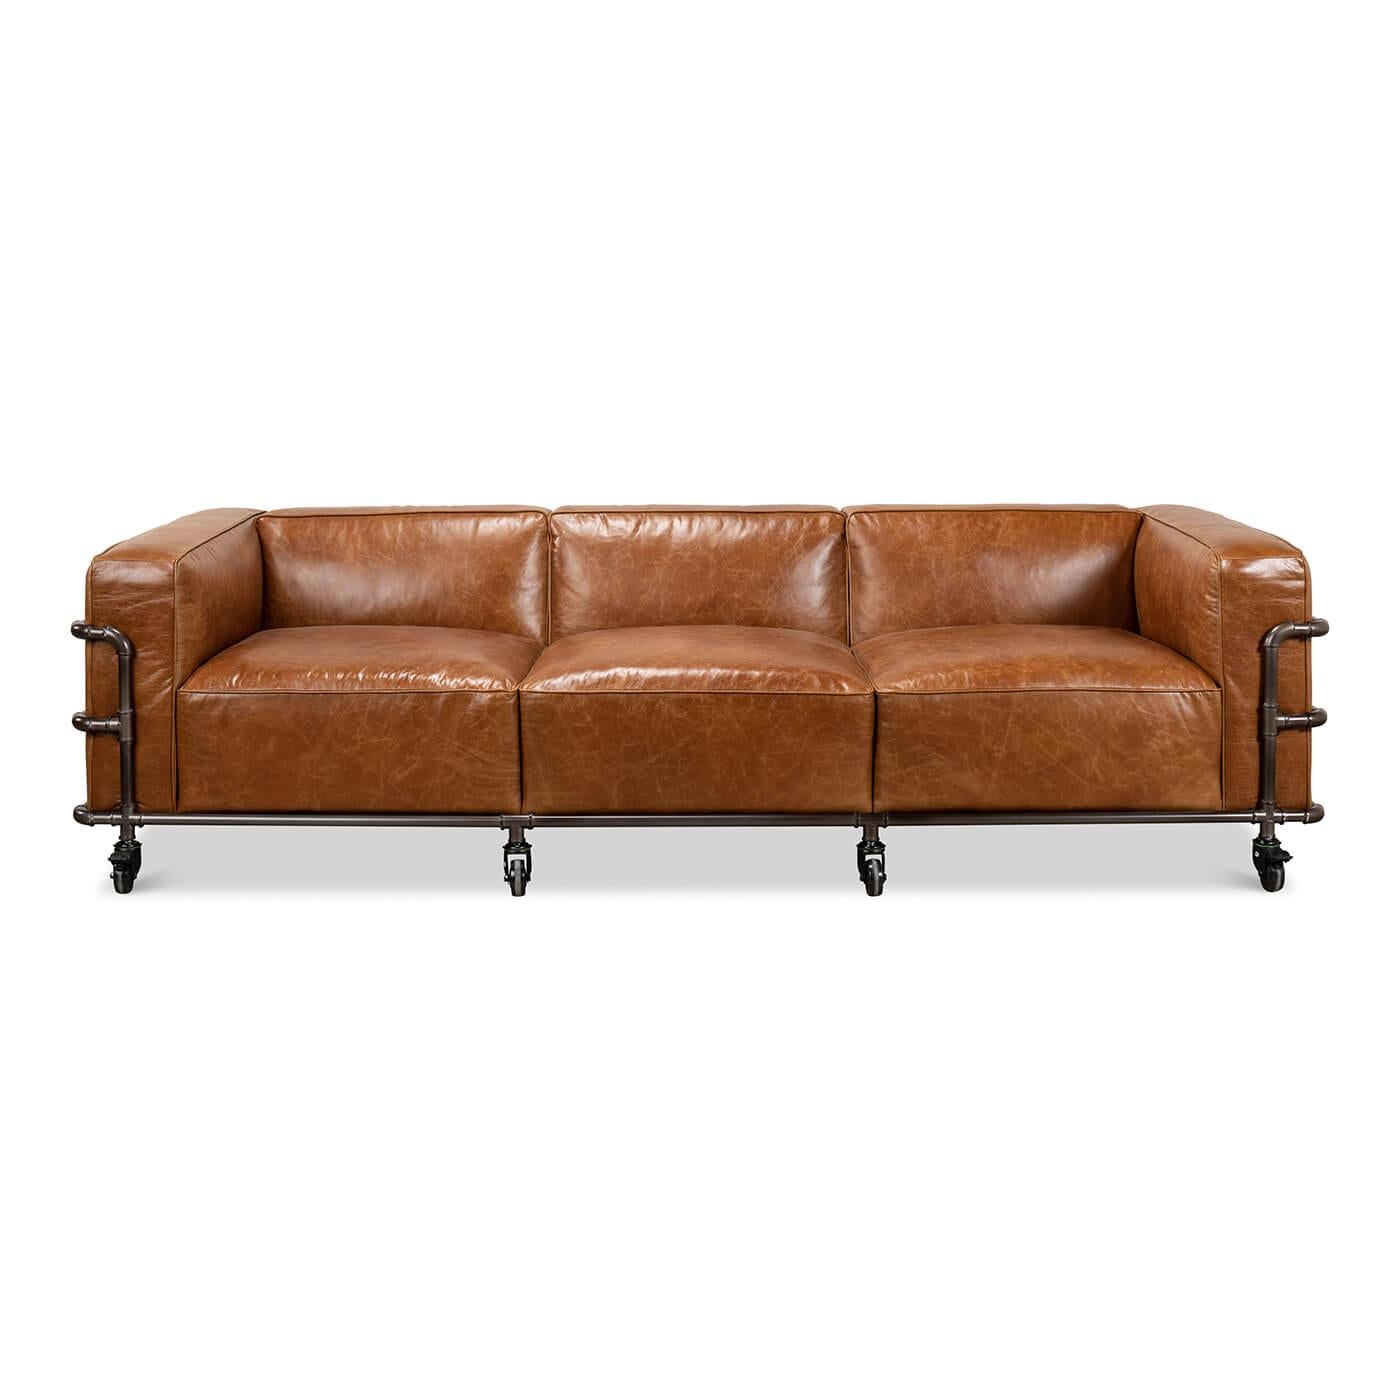 A modern British Industrial style triple sofa, with an Industrial exterior frame and large Industrial wheels. The sofa upholstered with vintage-style high-grade aniline brown leather. 

Dimensions: 102